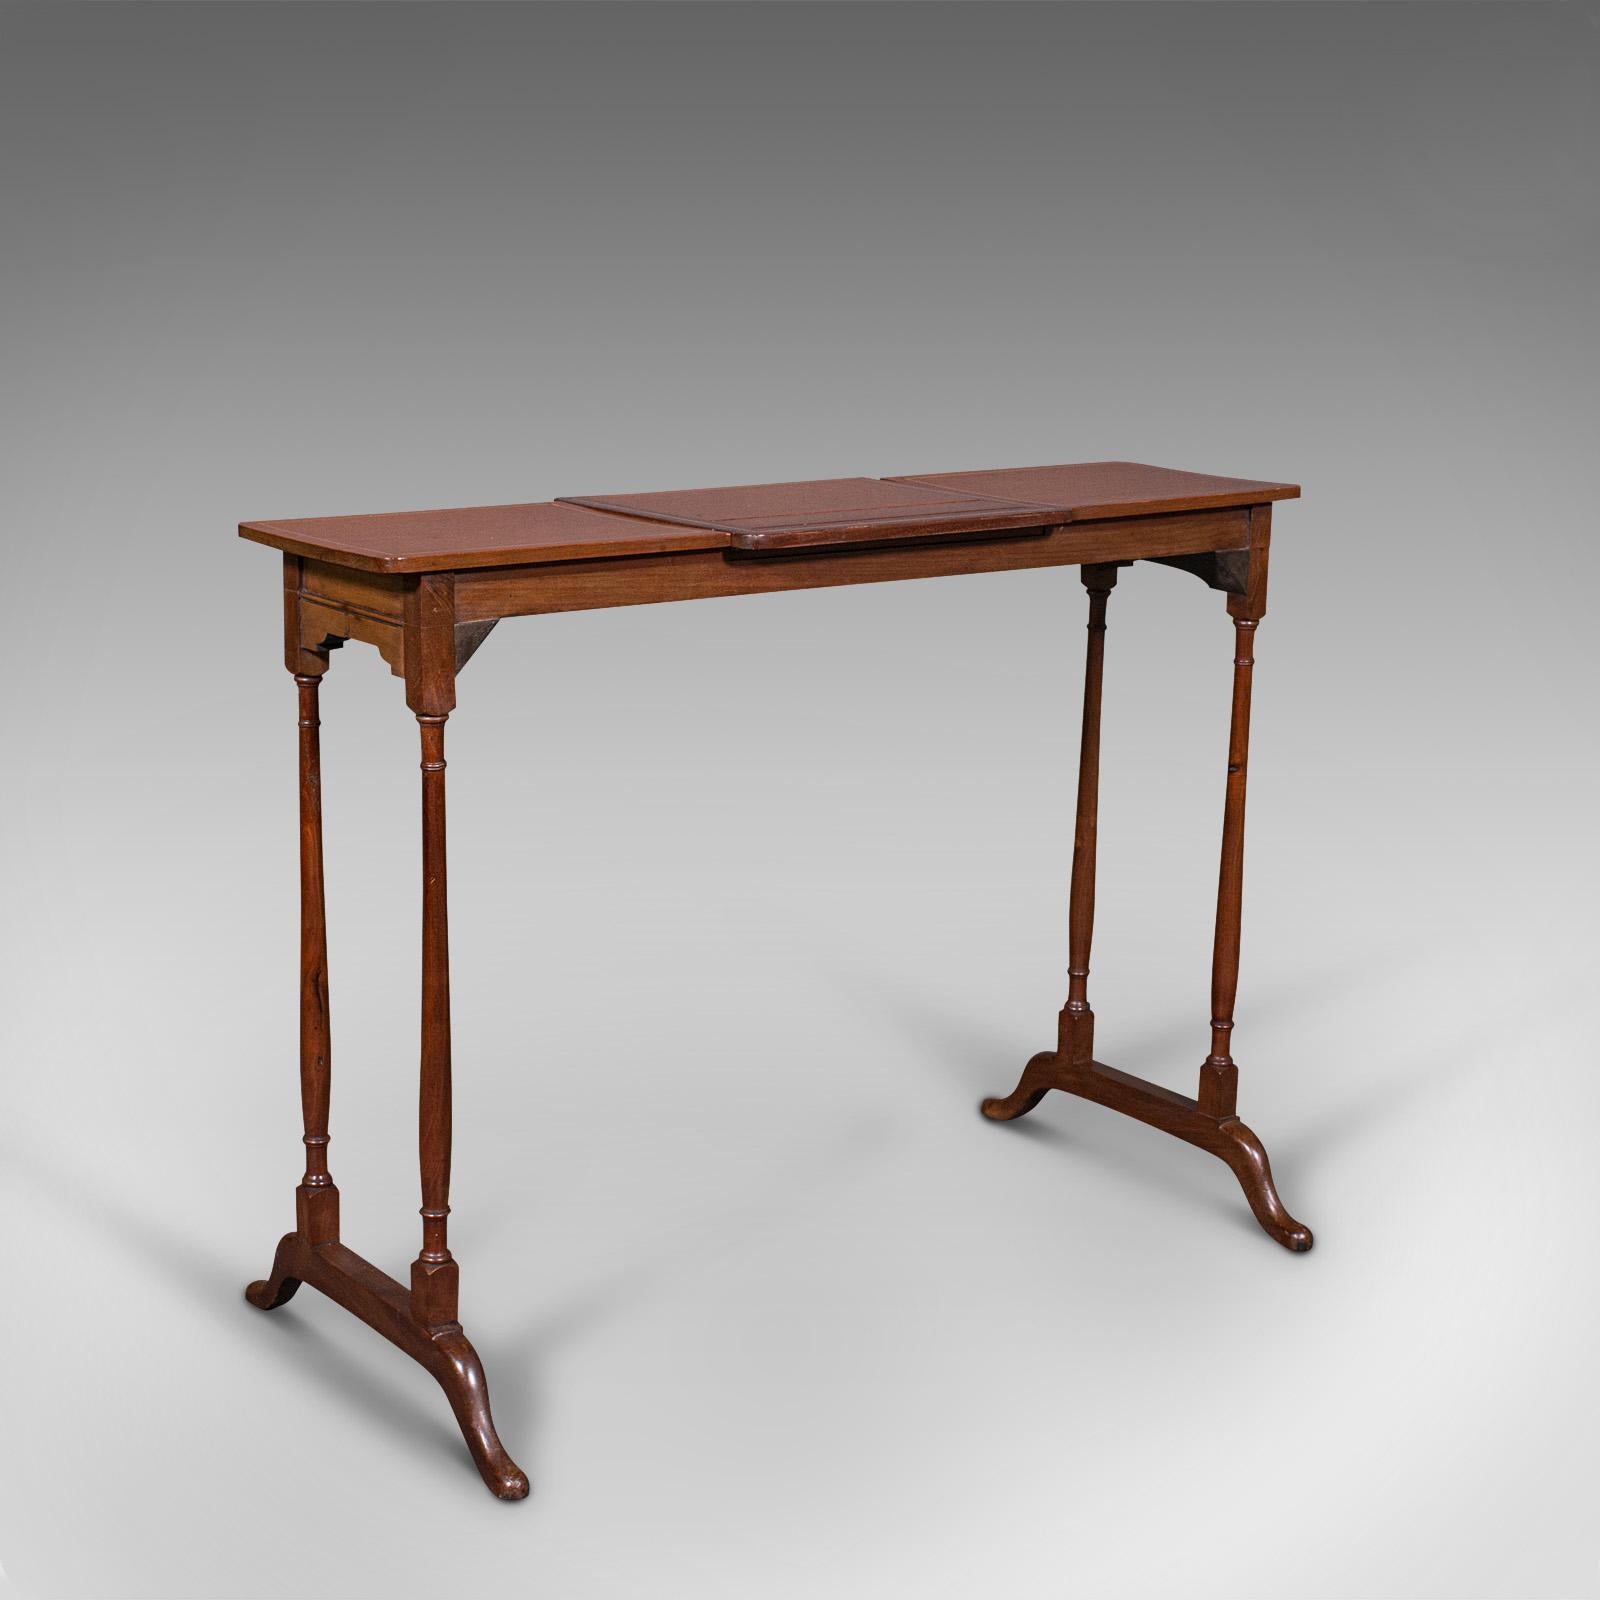 This is an antique conductor's stand. An English, mahogany adjustable music rest or lectern, dating to the Edwardian period, circa 1910.

Elegantly presented stand, ideal for public recitals or speeches
Displays a desirable aged patina and in